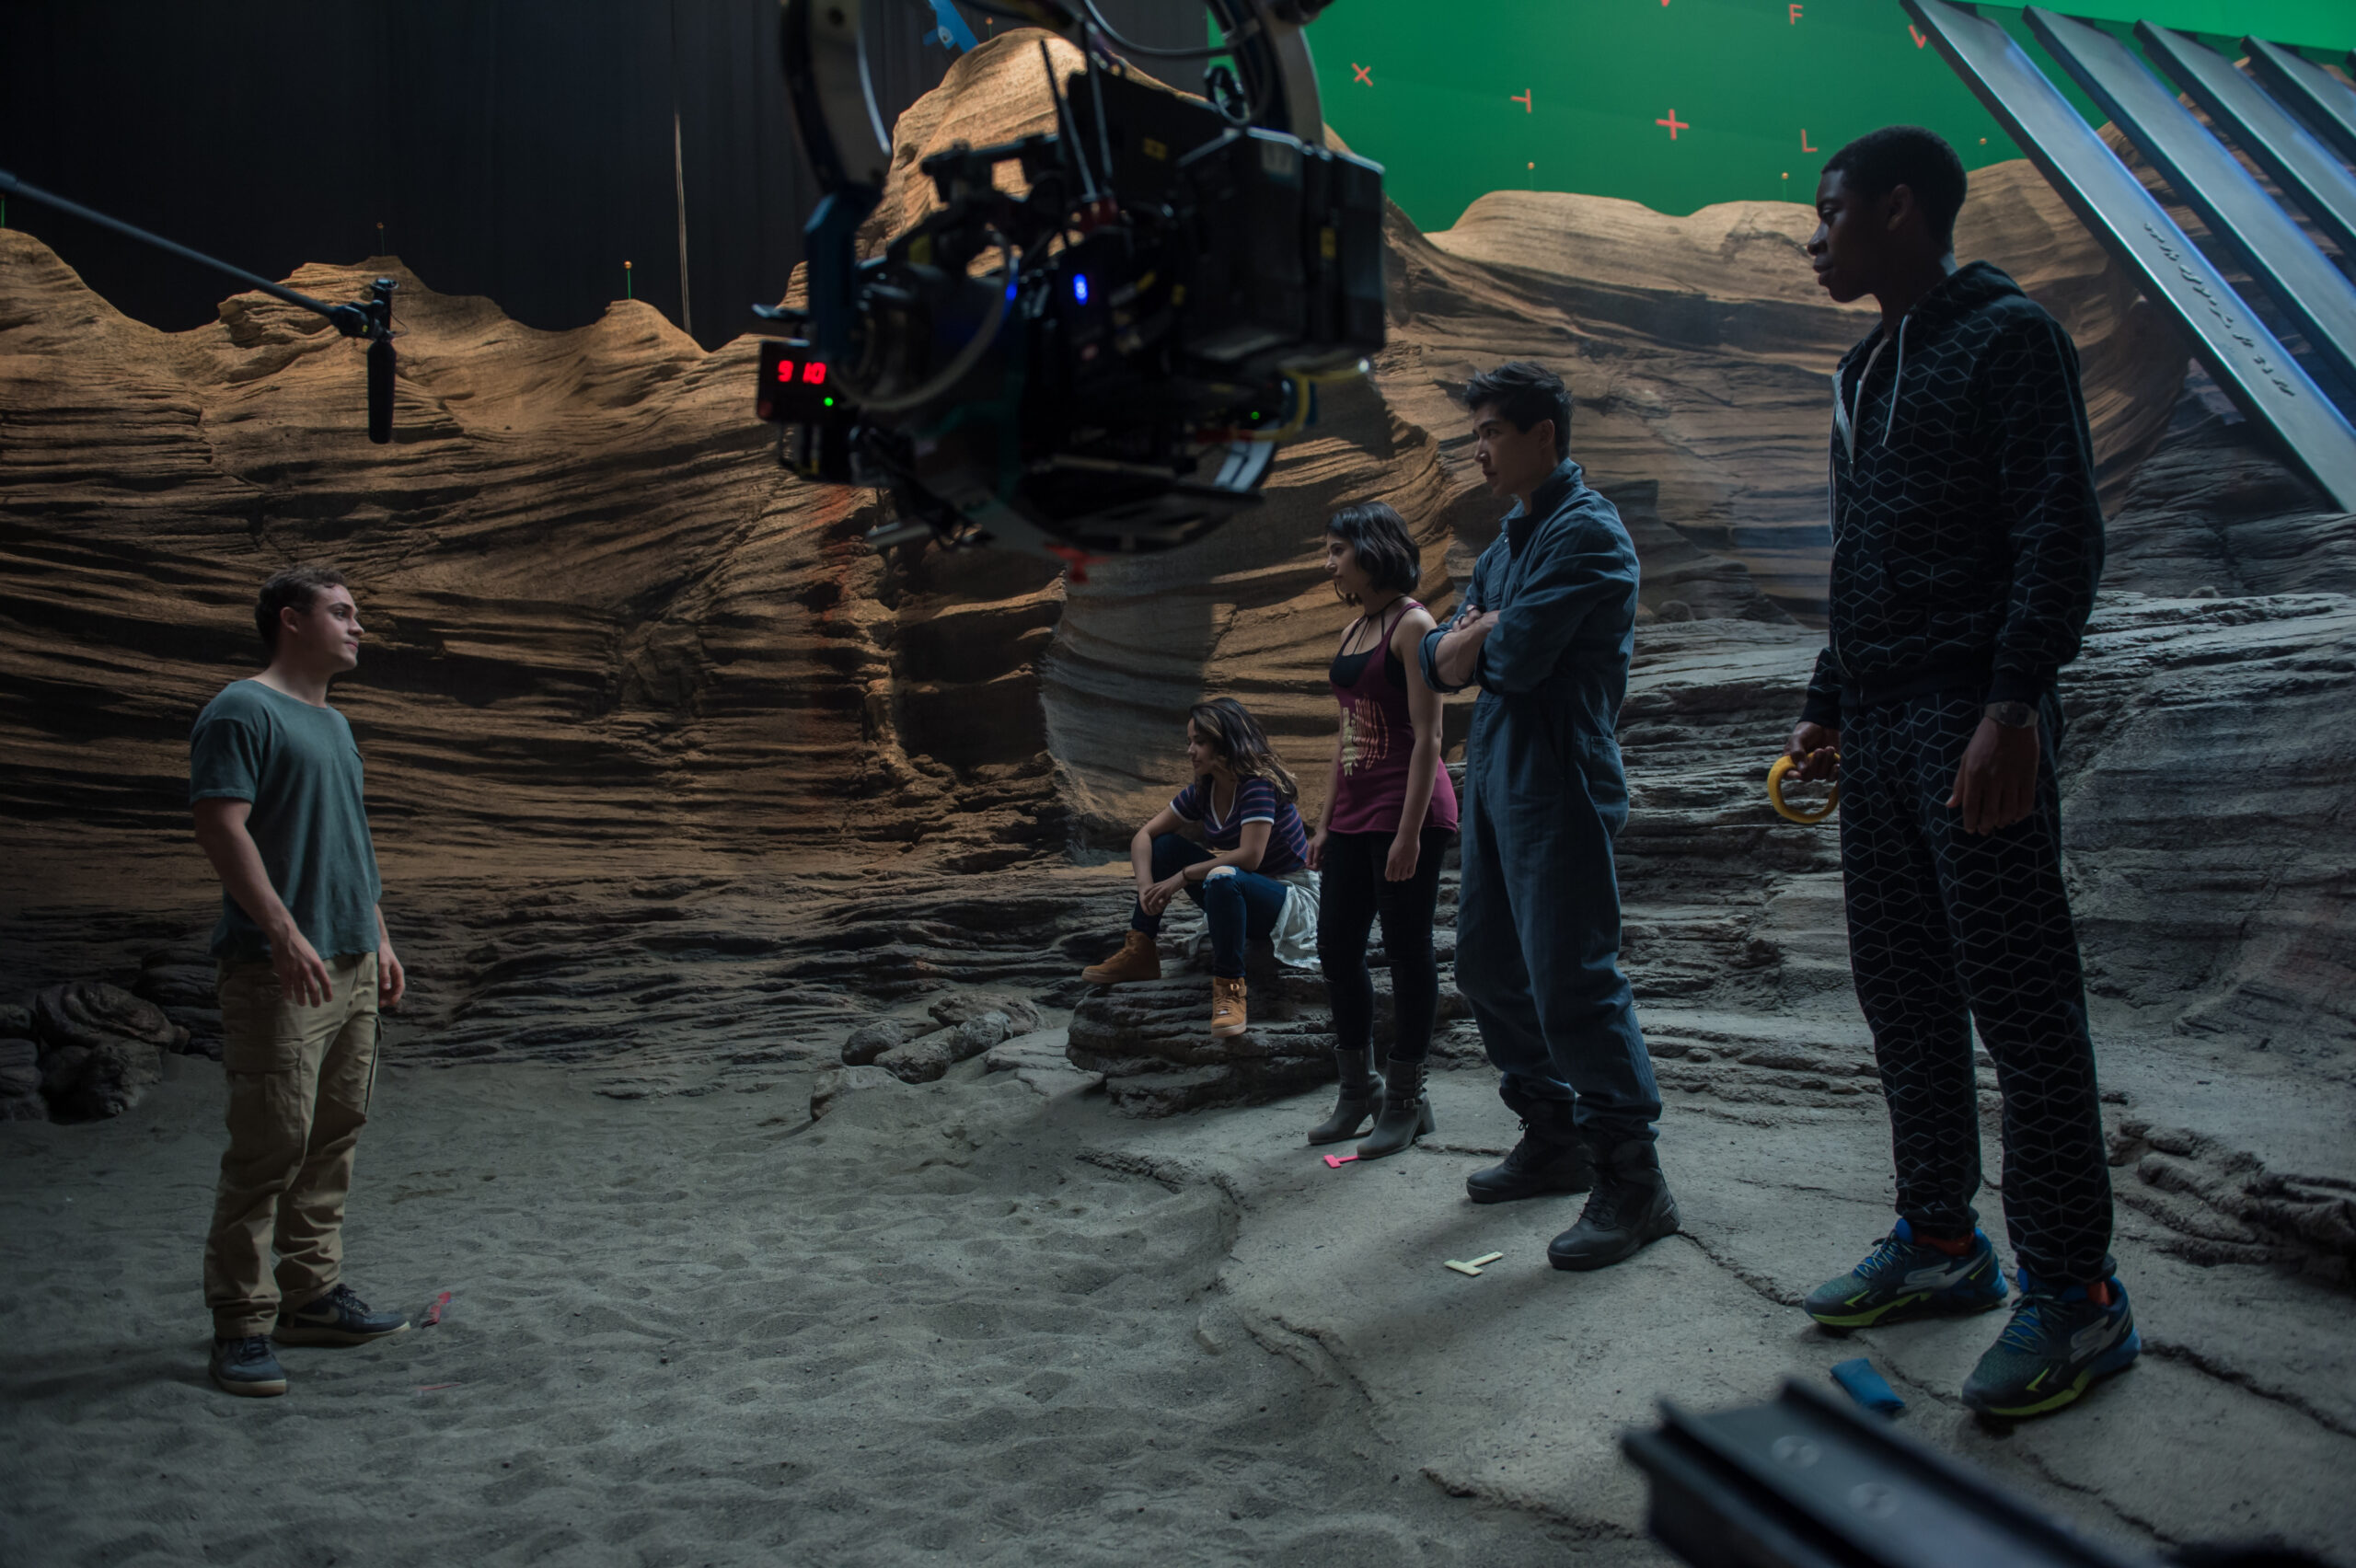 From L to R: Dacre Montgomery, Becky G, Naomi Scott, Ludi Lin and RJ Cyler on the set of SABAN'S POWER RANGERS. Photo by Kimberley French.